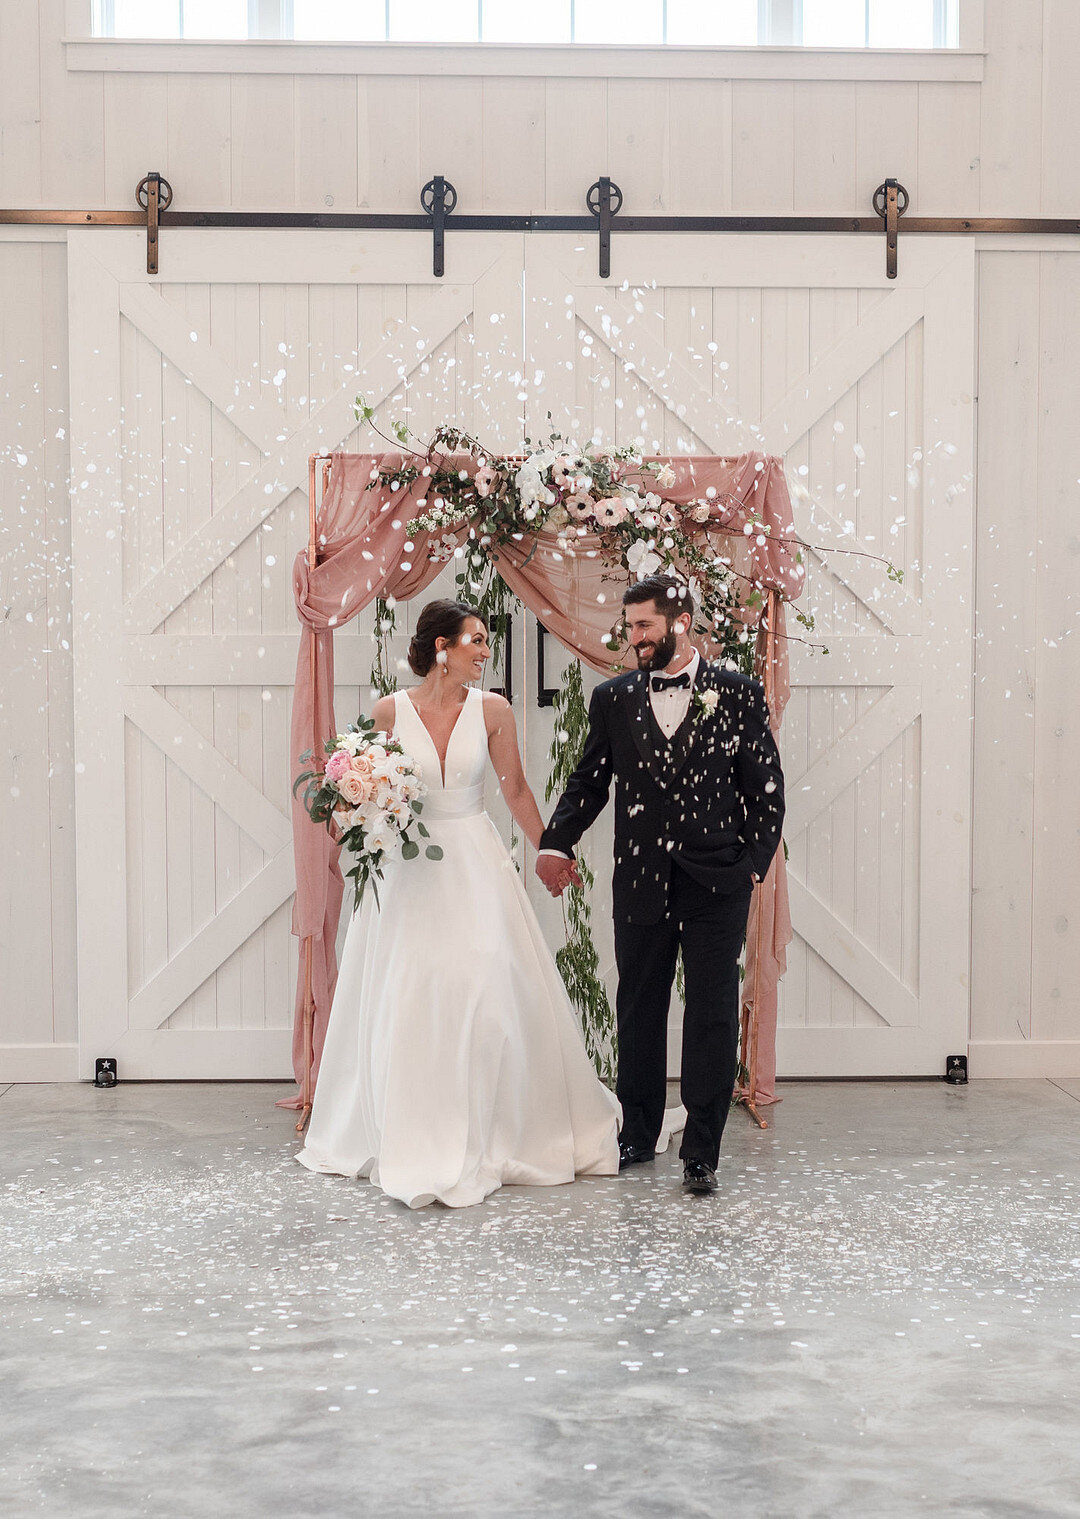 A team of West Virginia and Pennsylvania Wedding Vendors decked out this lovely Pittsburgh Wedding Venue, The Grayson House with some seriously swoon worthy inspo! Photographed by Alisha Faith Photography